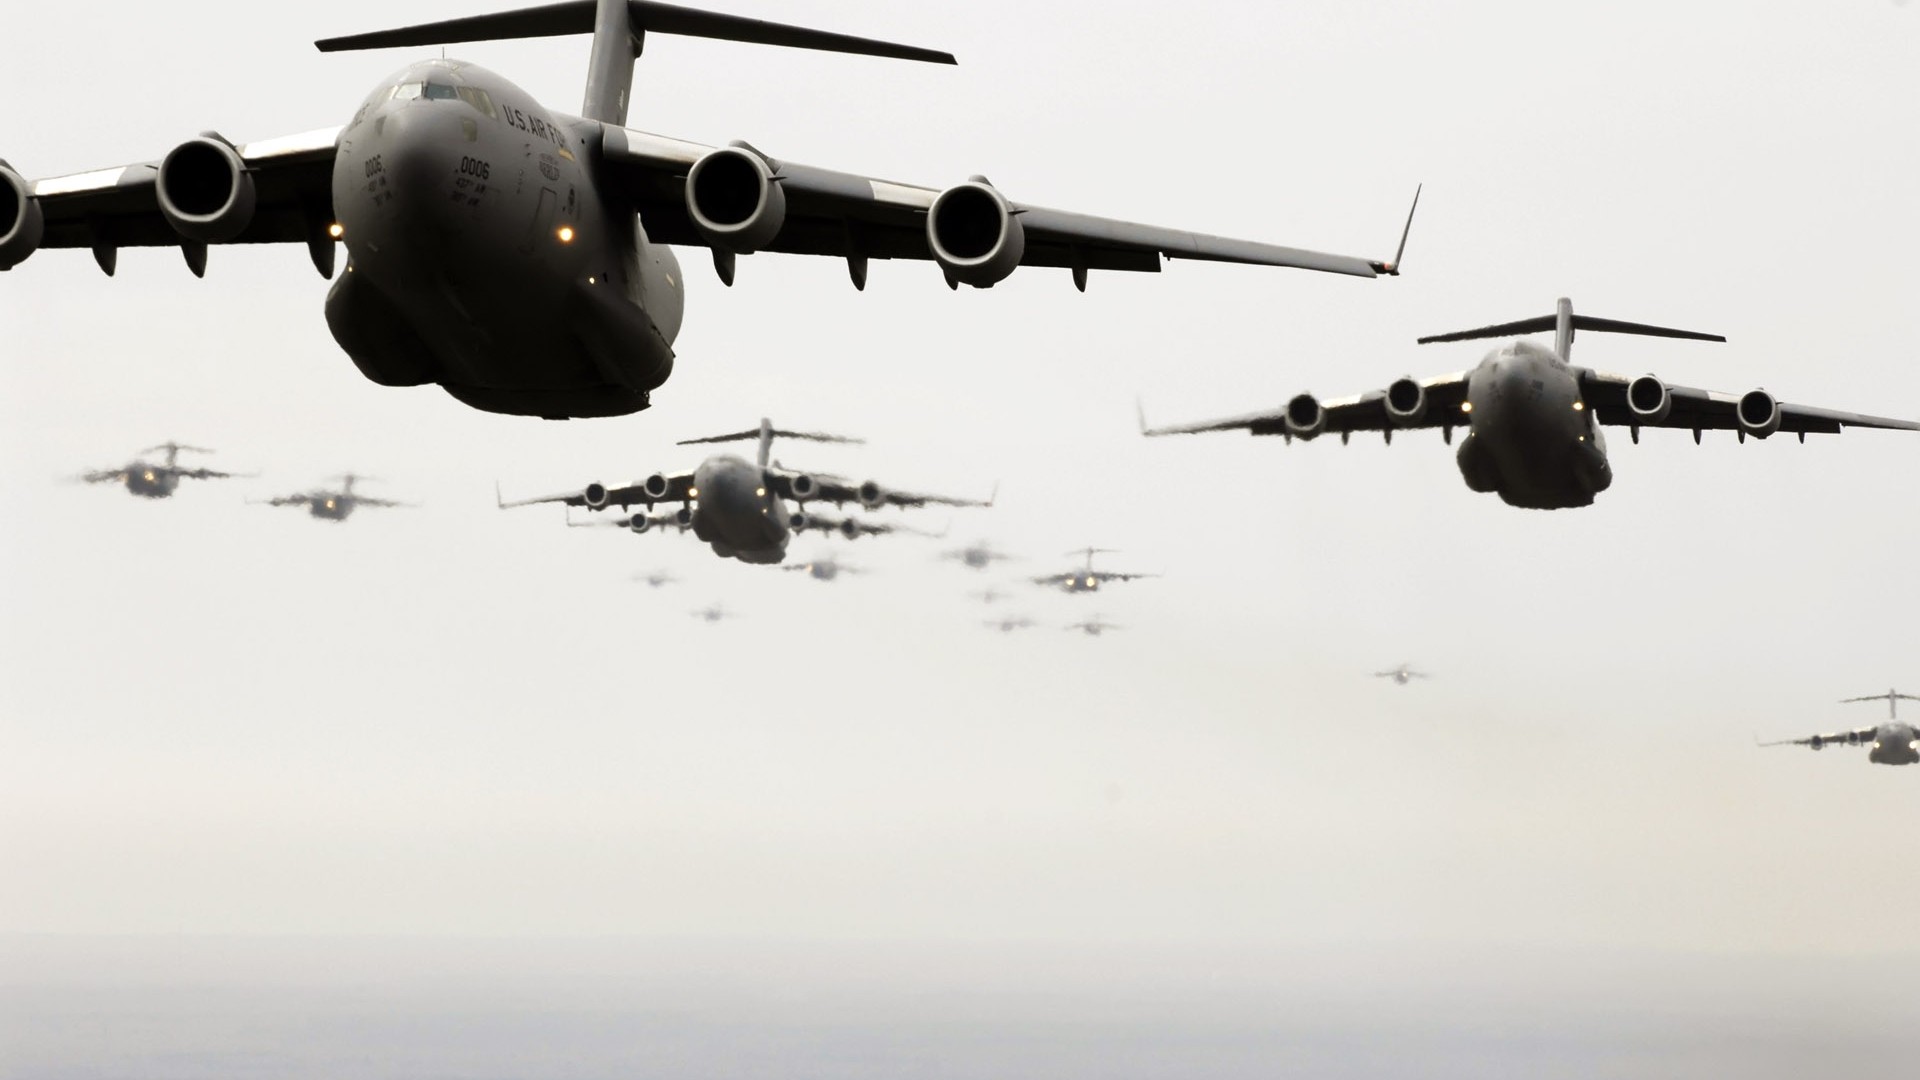 General 1920x1080 military aircraft airplane jets sky Boeing C-17 Globemaster III military aircraft American aircraft